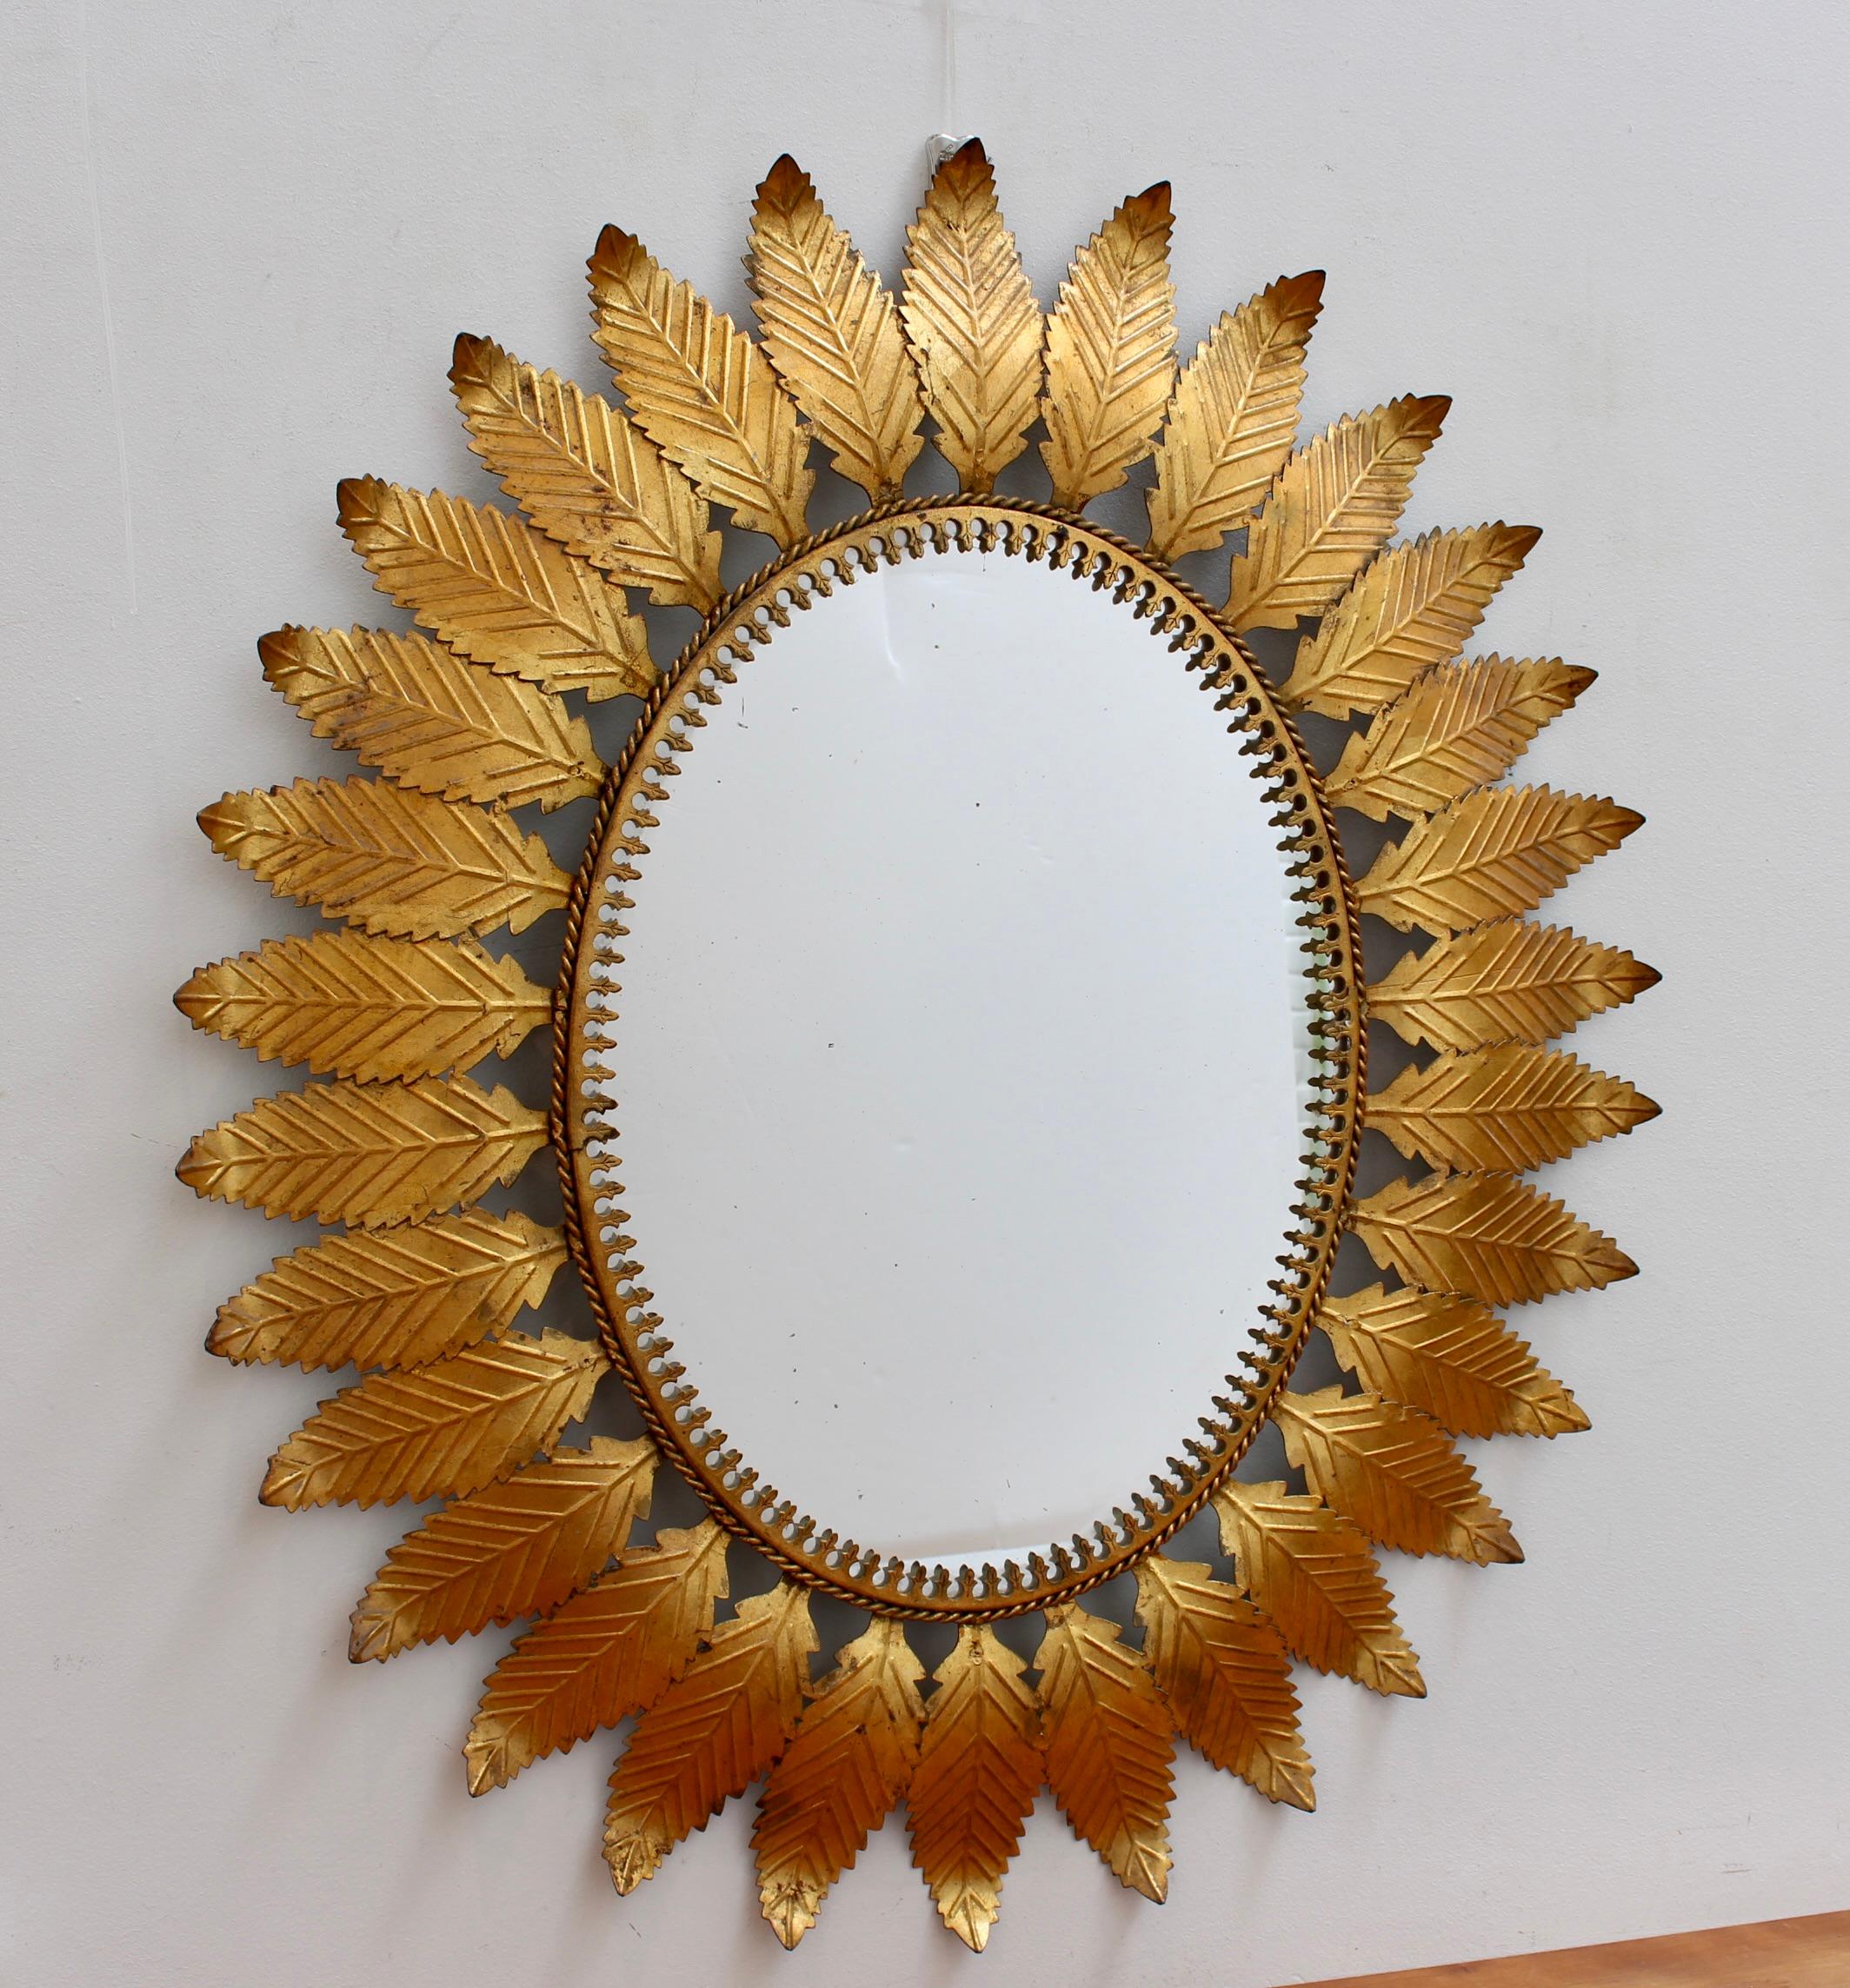 Vintage Spanish Gilt Metal Sunburst Mirror with Leaf Motif (circa 1970s) In Good Condition For Sale In London, GB